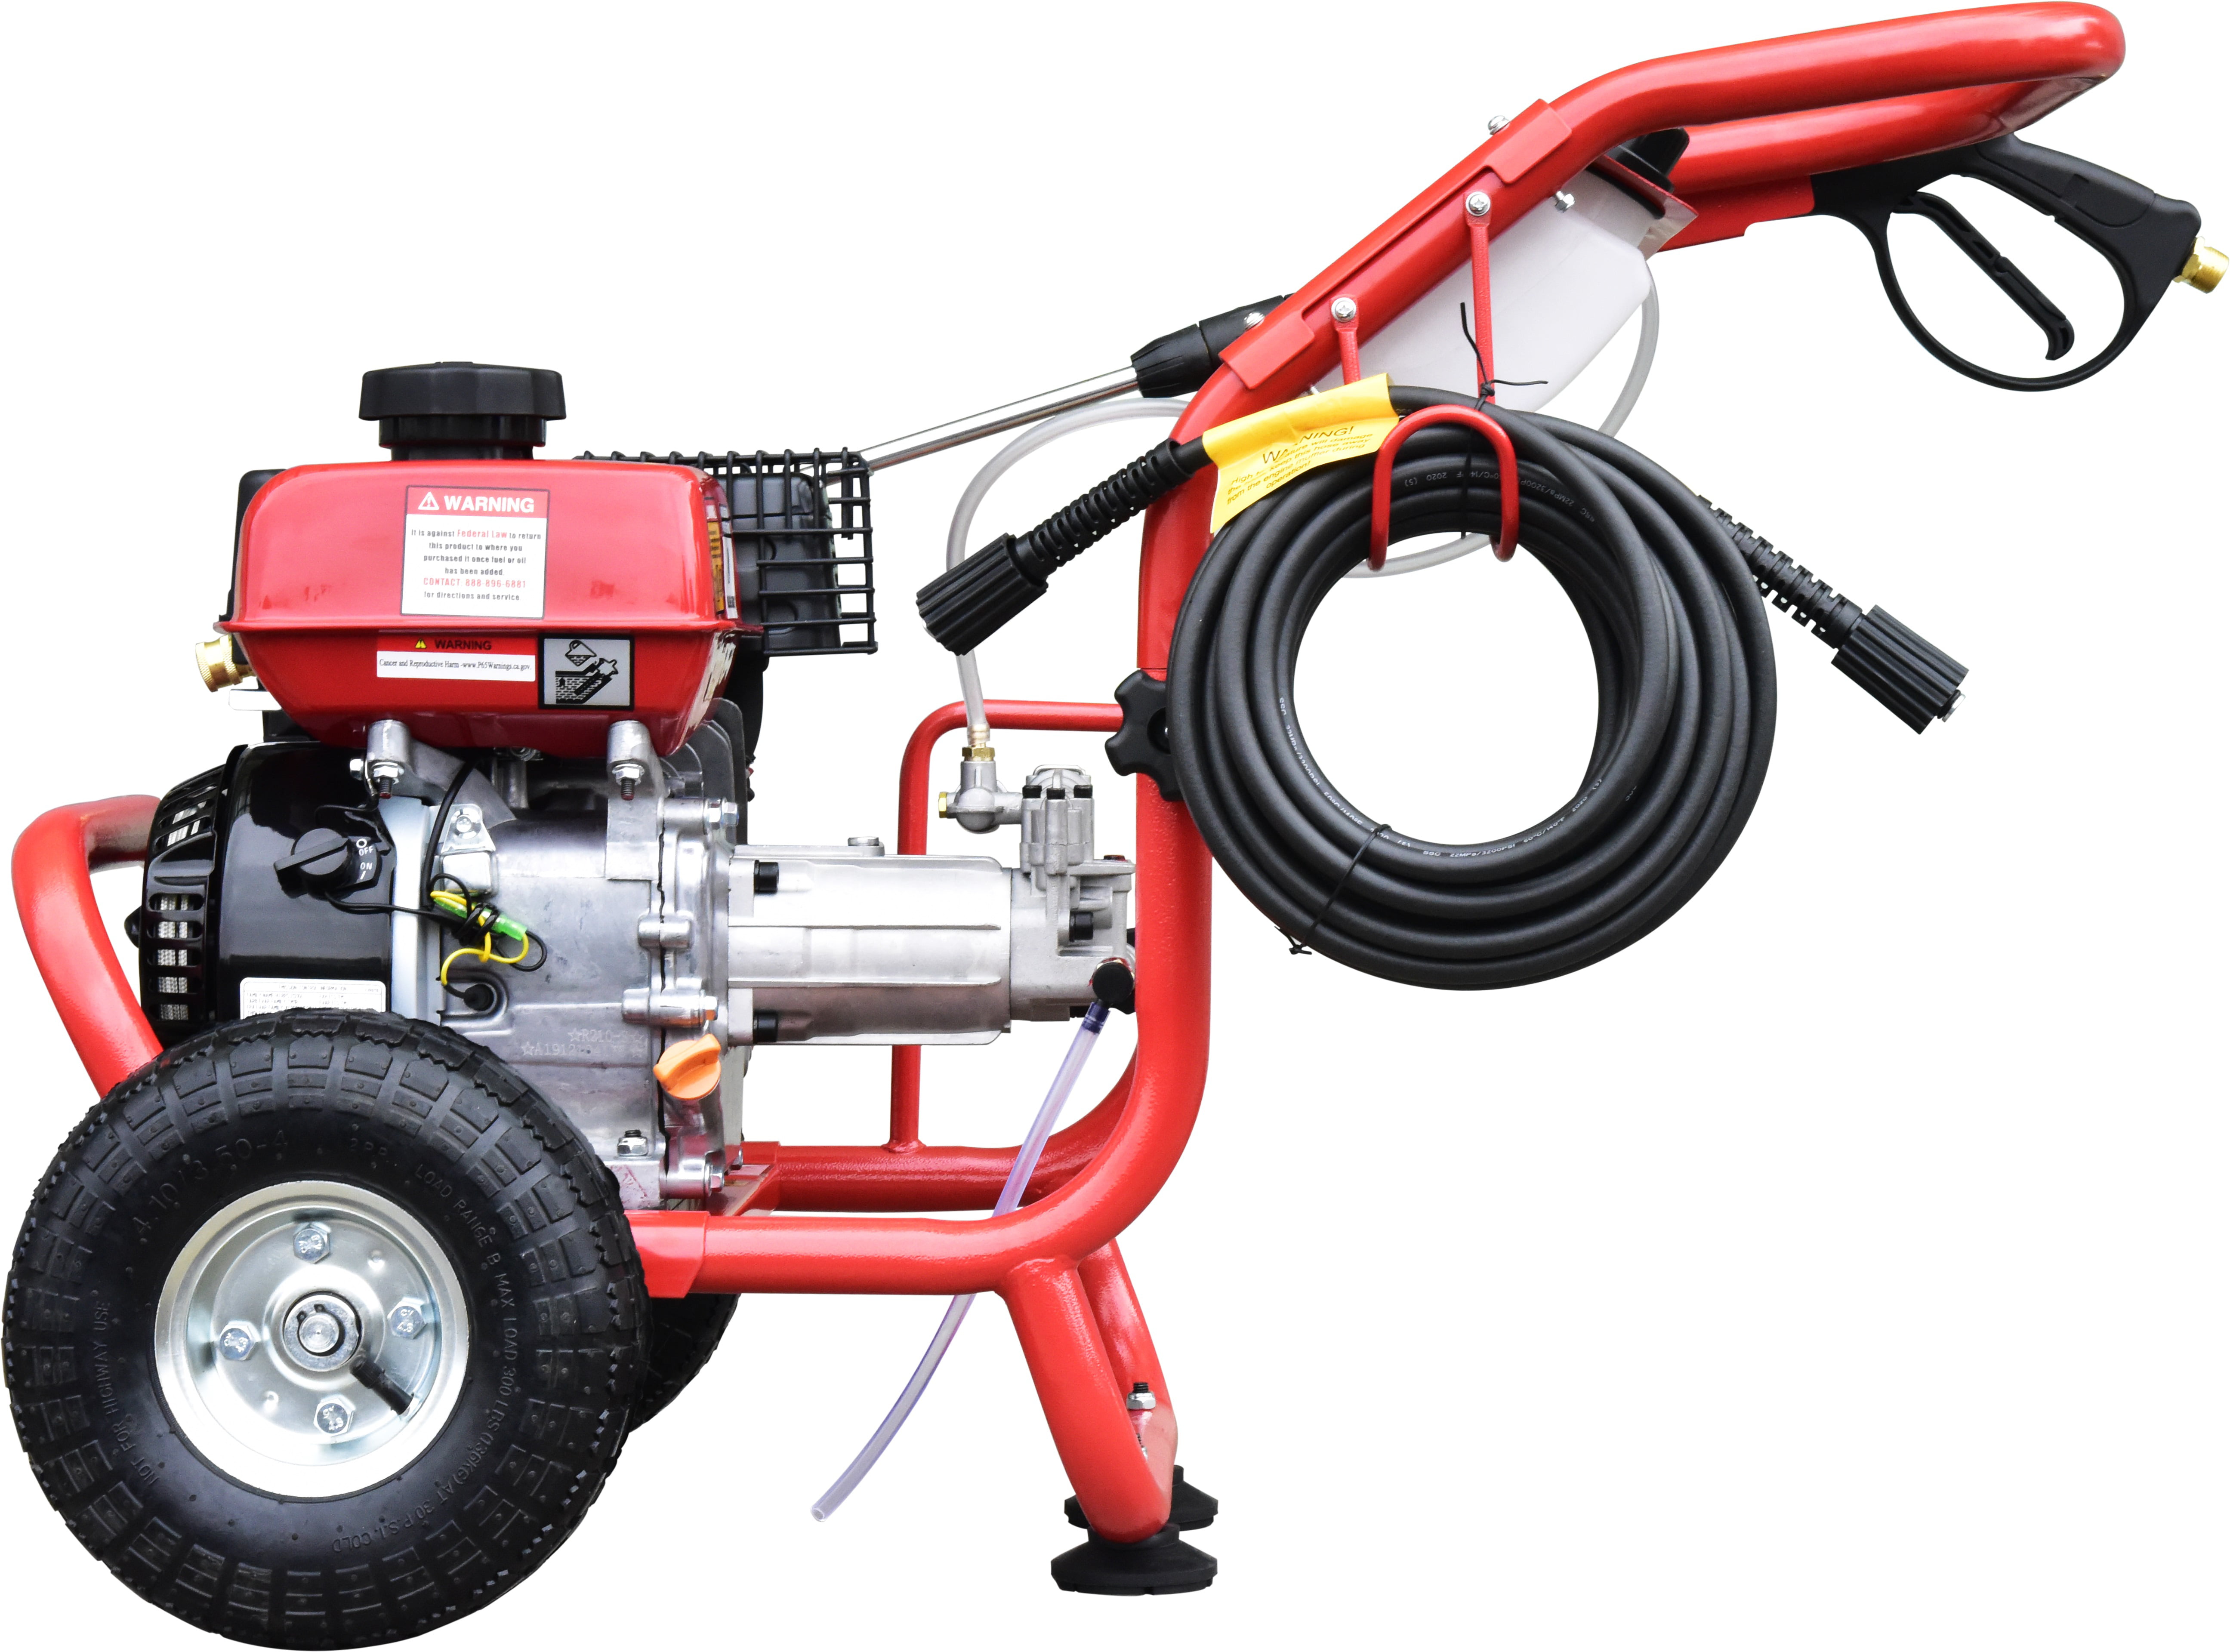 All Power America 3100 PSI, 2.6 GPM Gas Pressure Washer w/ 30 ft High Pressure Hose, C.A.R.B. Compliant, APW5118A - 3